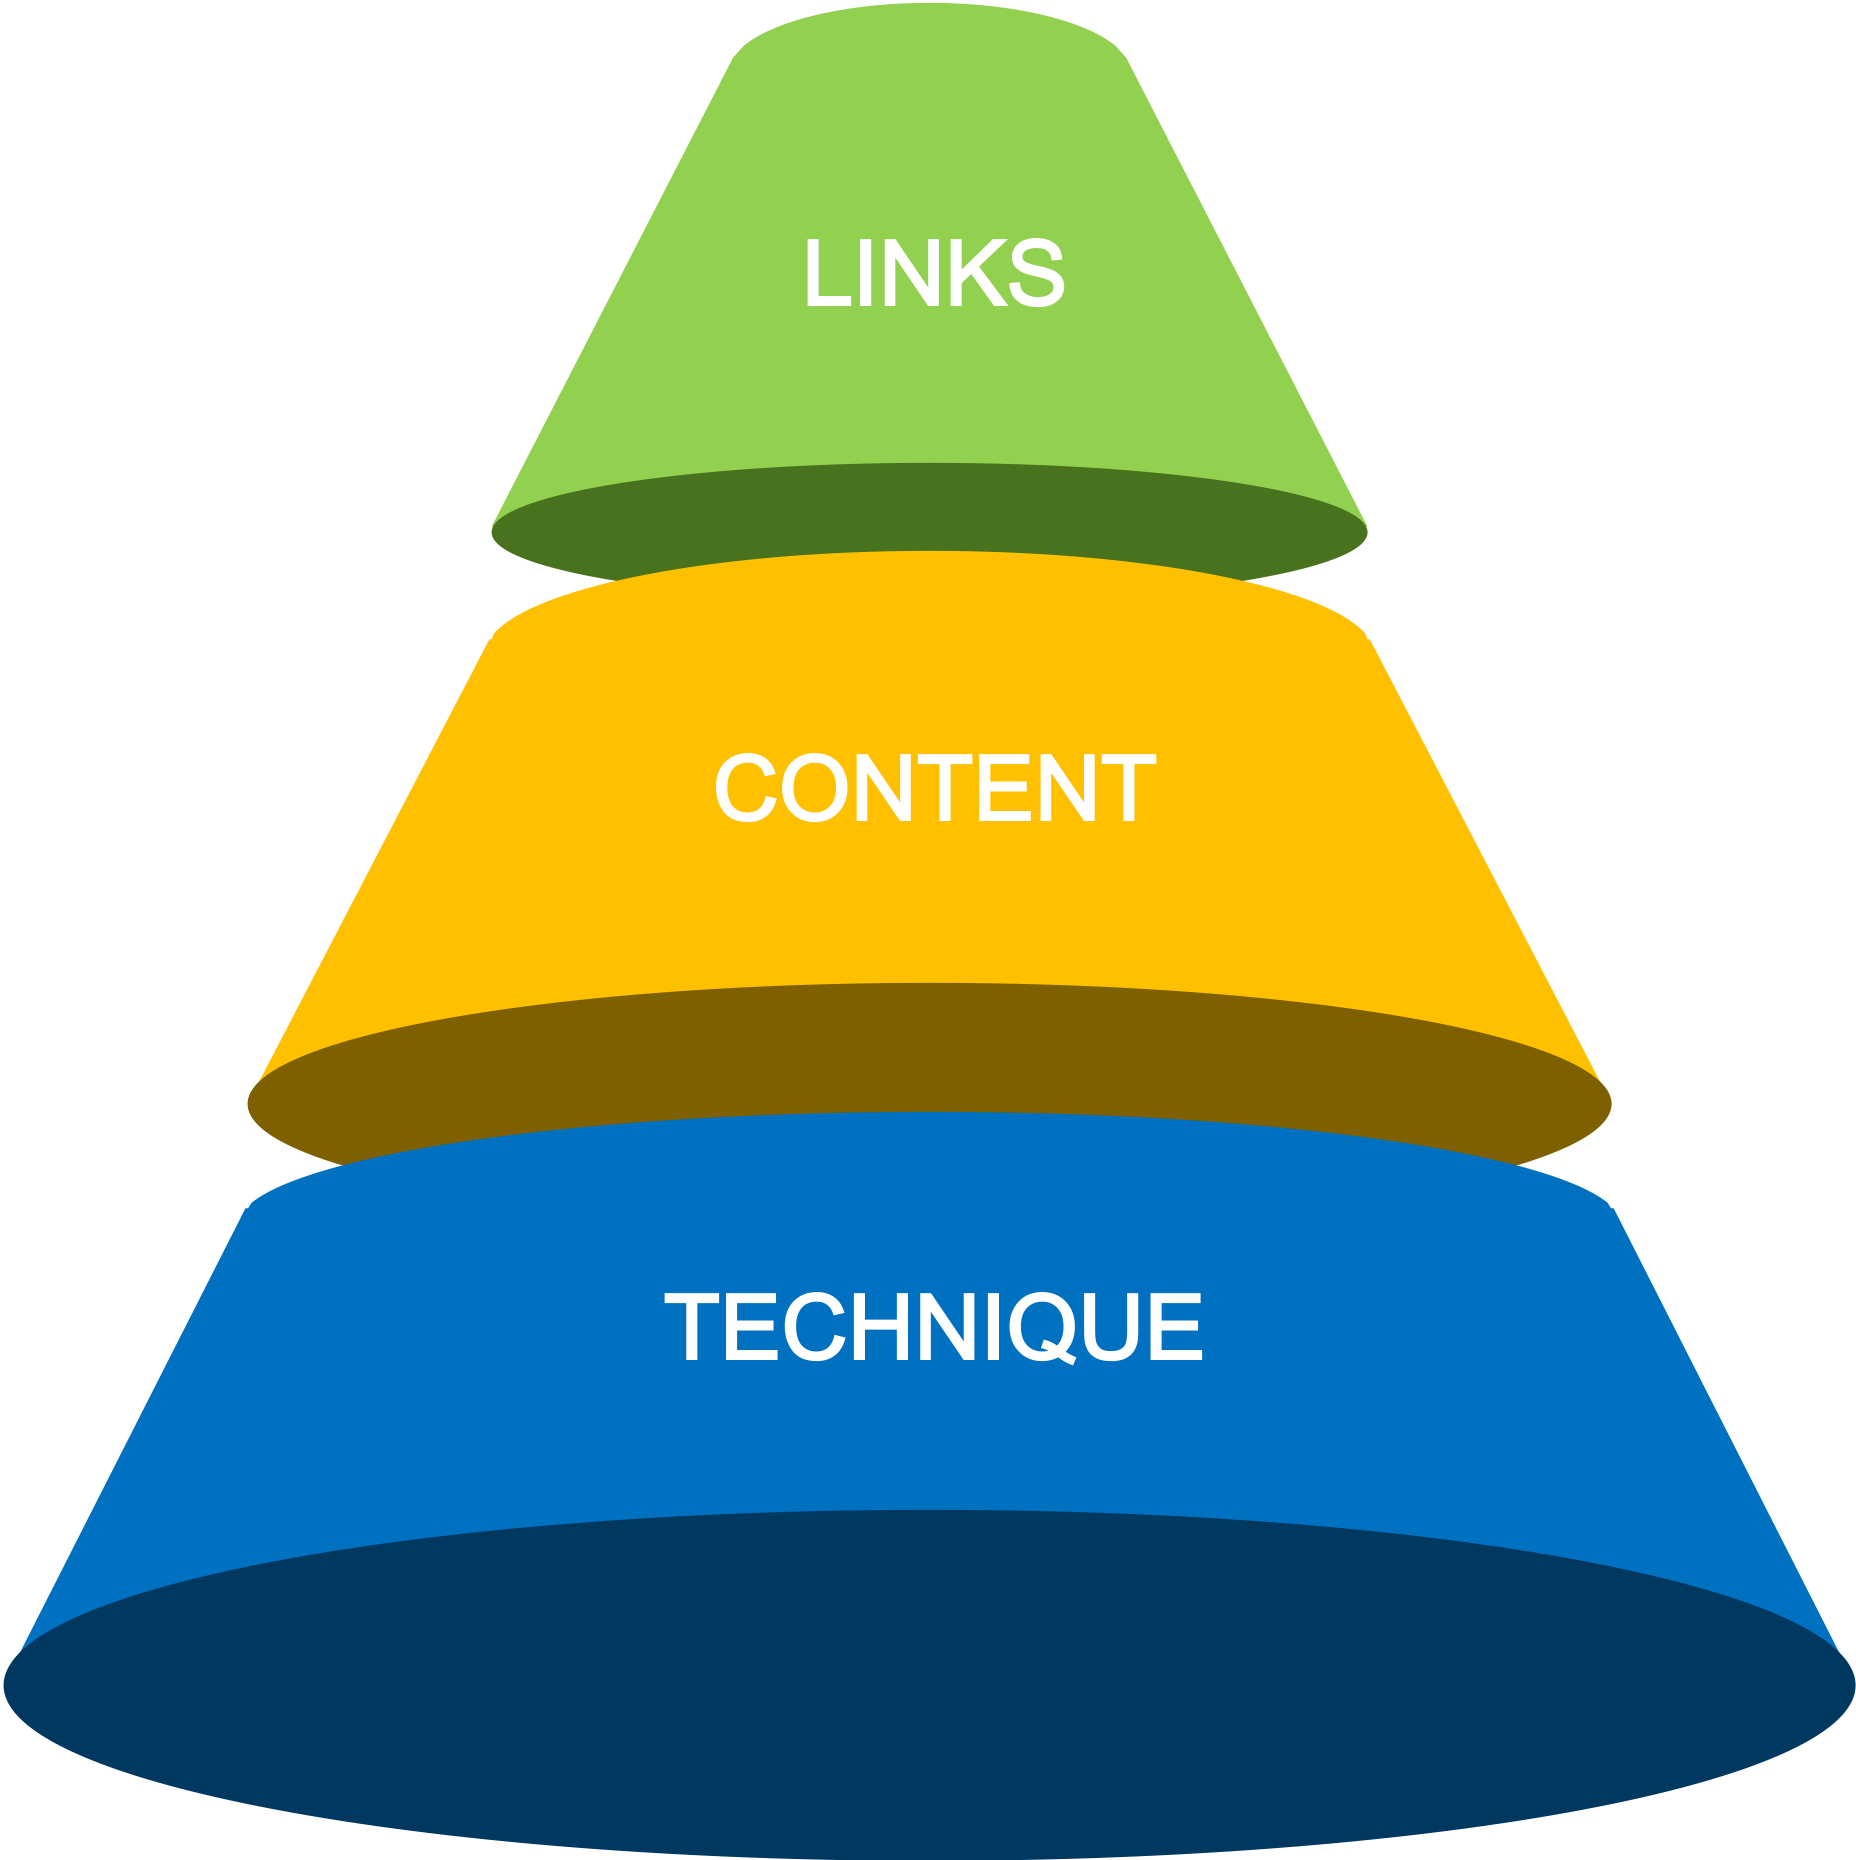 SEO work is split in three areas in a pyramid. Technique, content and links. Start with technique, then content and finally links.